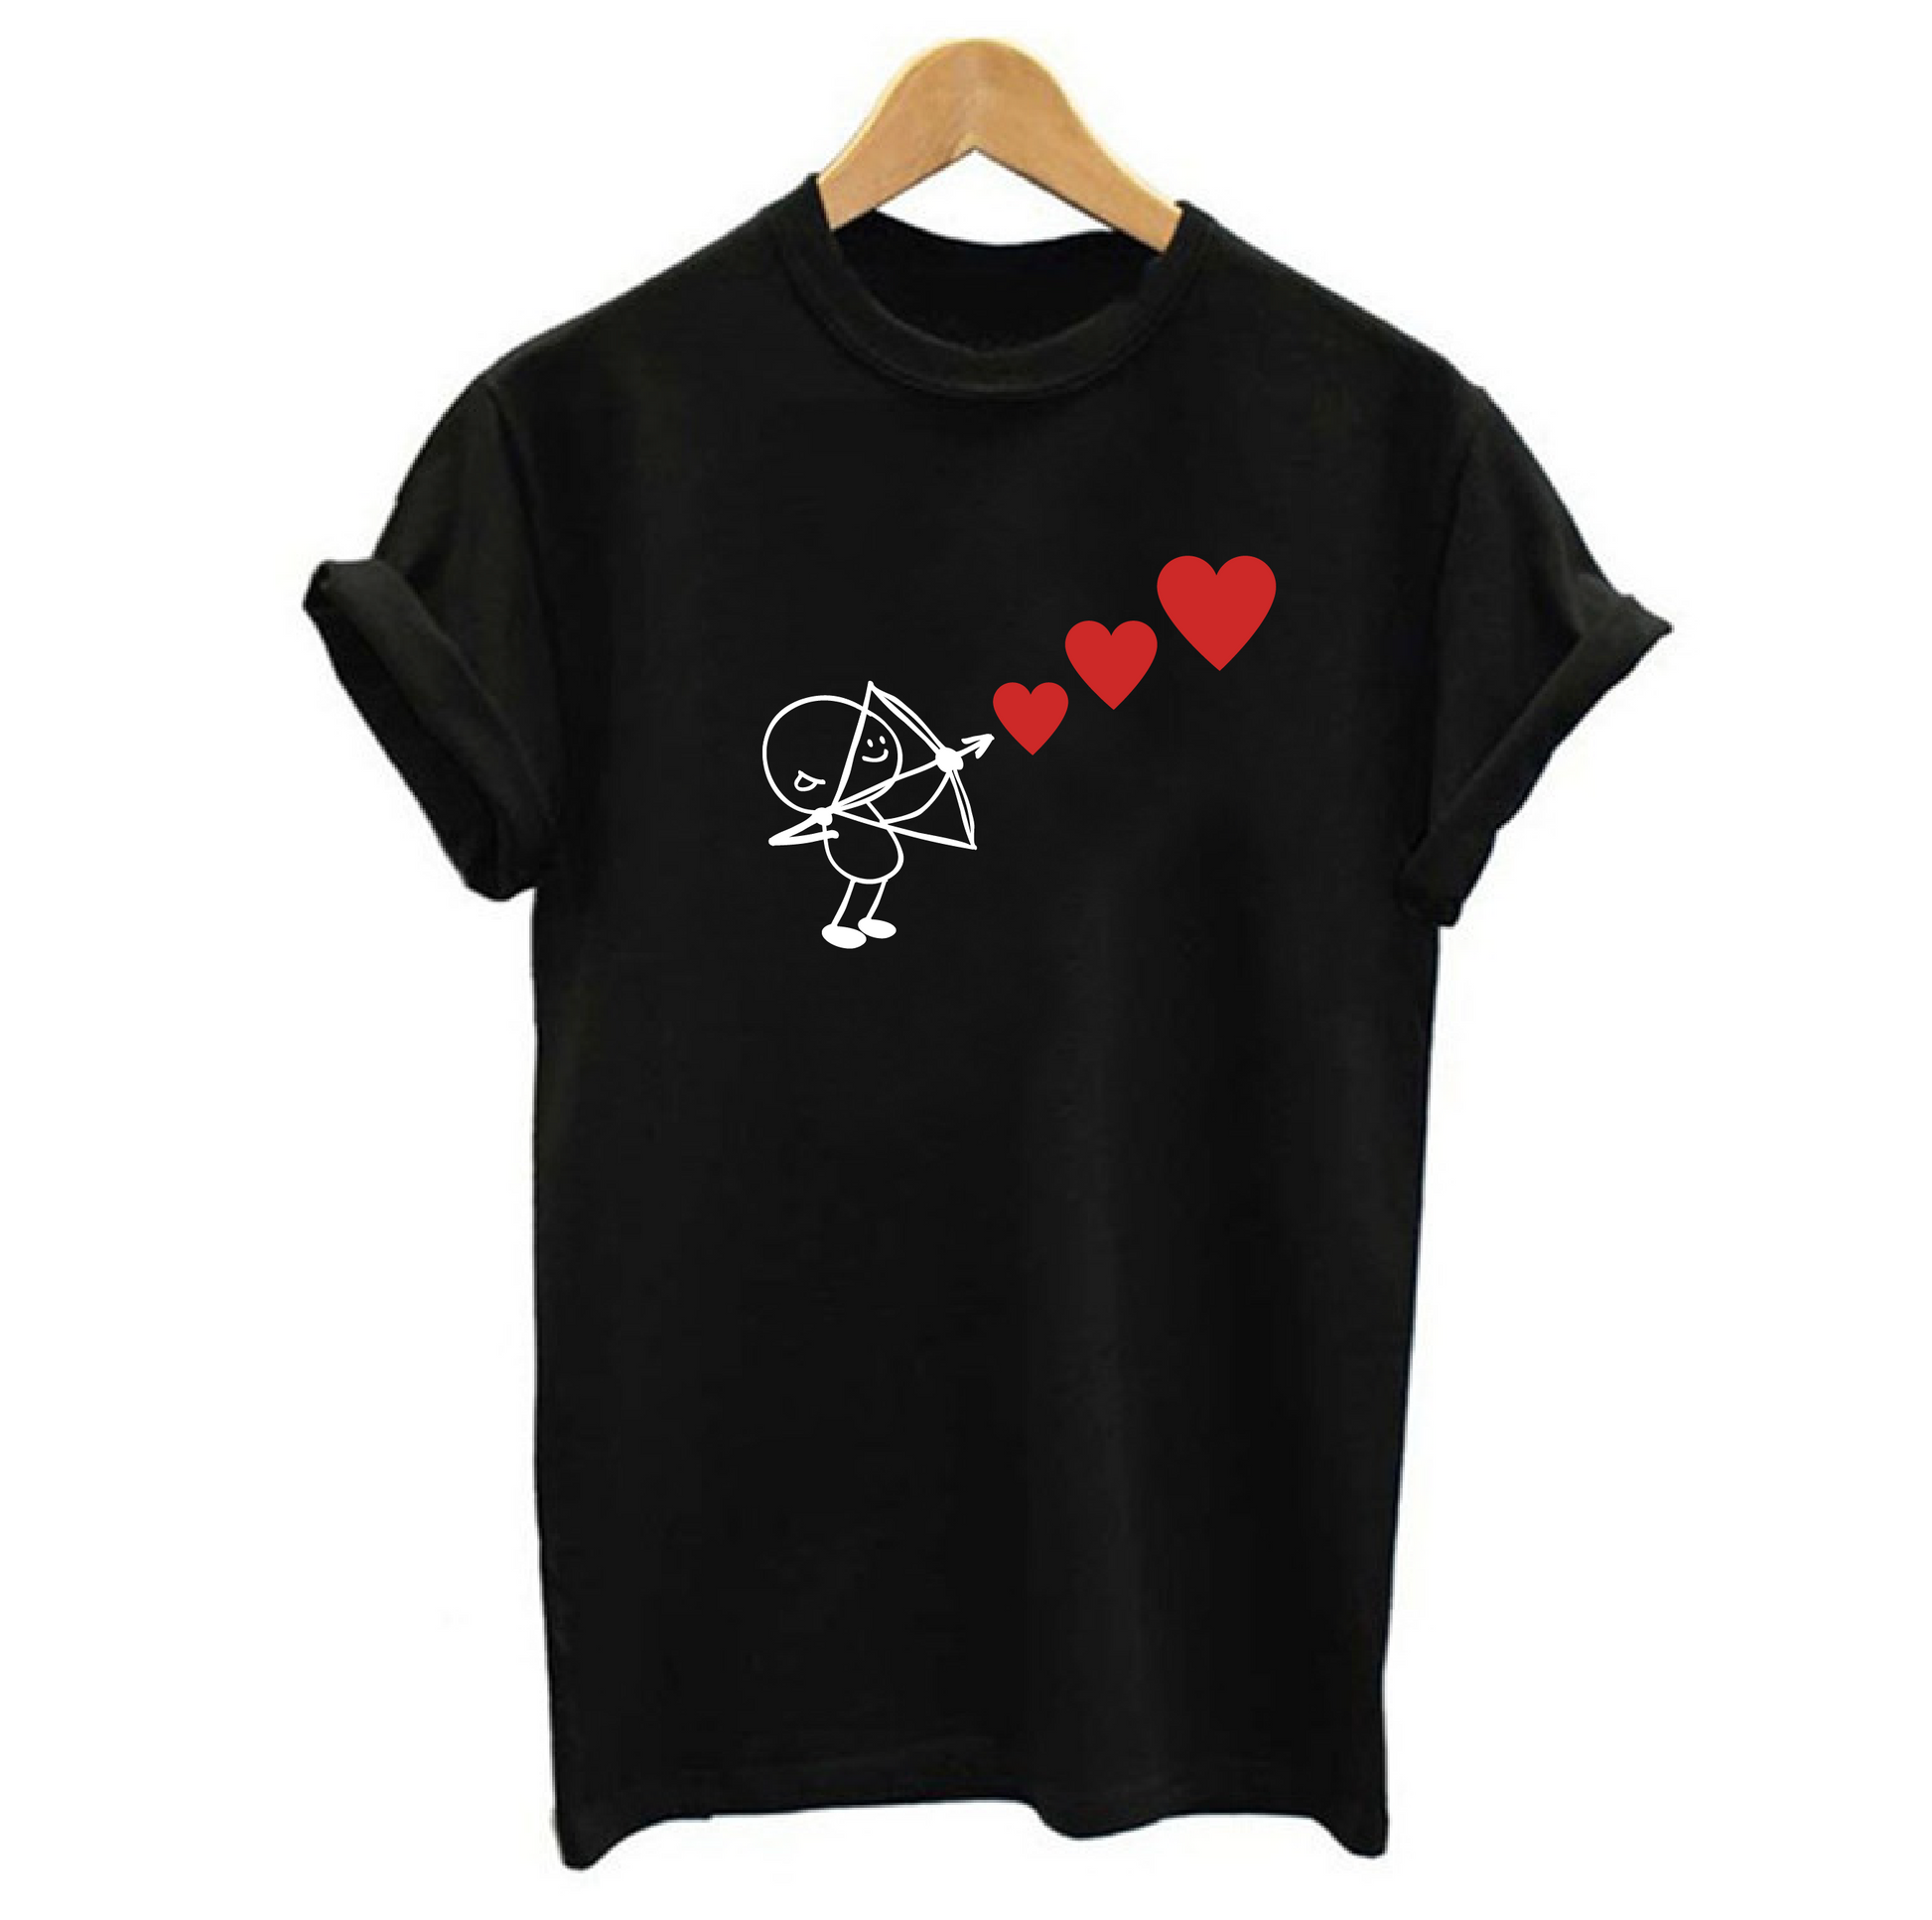 Cupid Shoots Red Hearts T-shirt Shoot Love Spread Love not germs or hate shirt